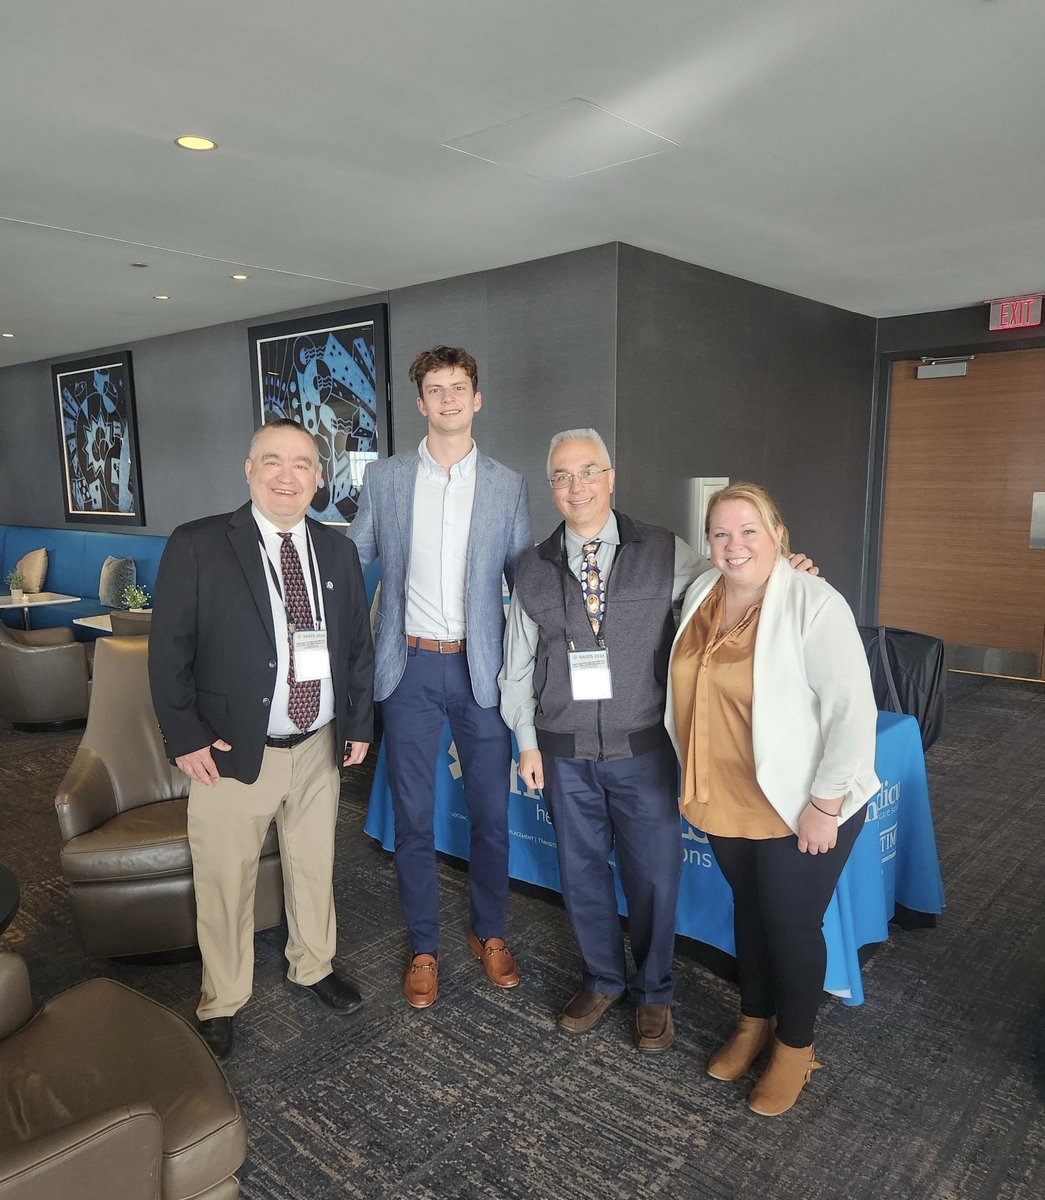 Members of the Medicus team had a great time at the SAGE Community Practice Surgery Event in Cleveland, OH! #SAGES2024 #Surgeons #LocumTenens